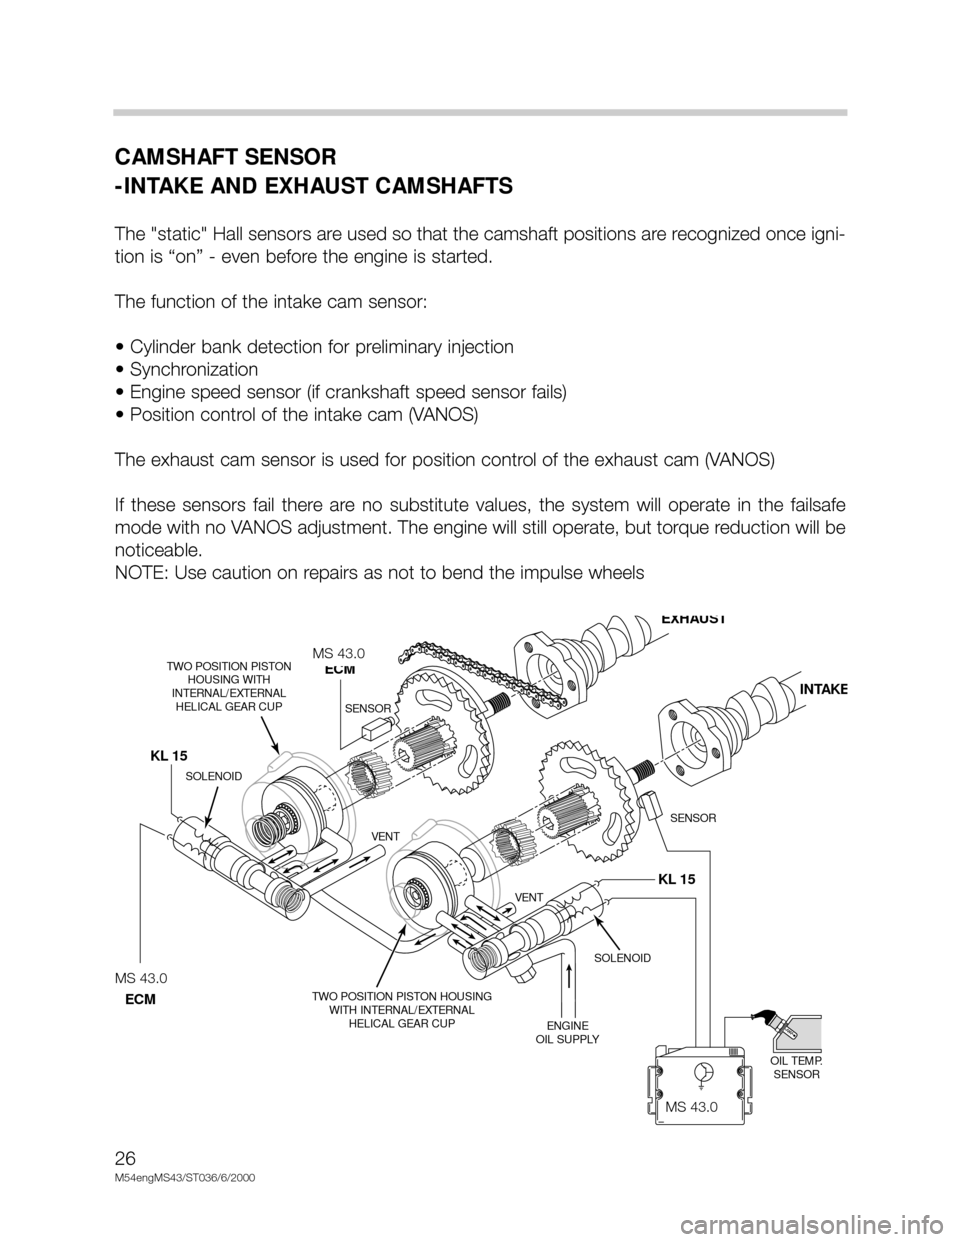 BMW X5 2001 E53 M54 Engine User Guide 26
M54engMS43/ST036/6/2000
CAMSHAFT SENSOR
-INTAKE AND EXHAUST CAMSHAFTS
The "static" Hall sensors are used so that the camshaft positions are recognized once igni-
tion is “on” - even before the 